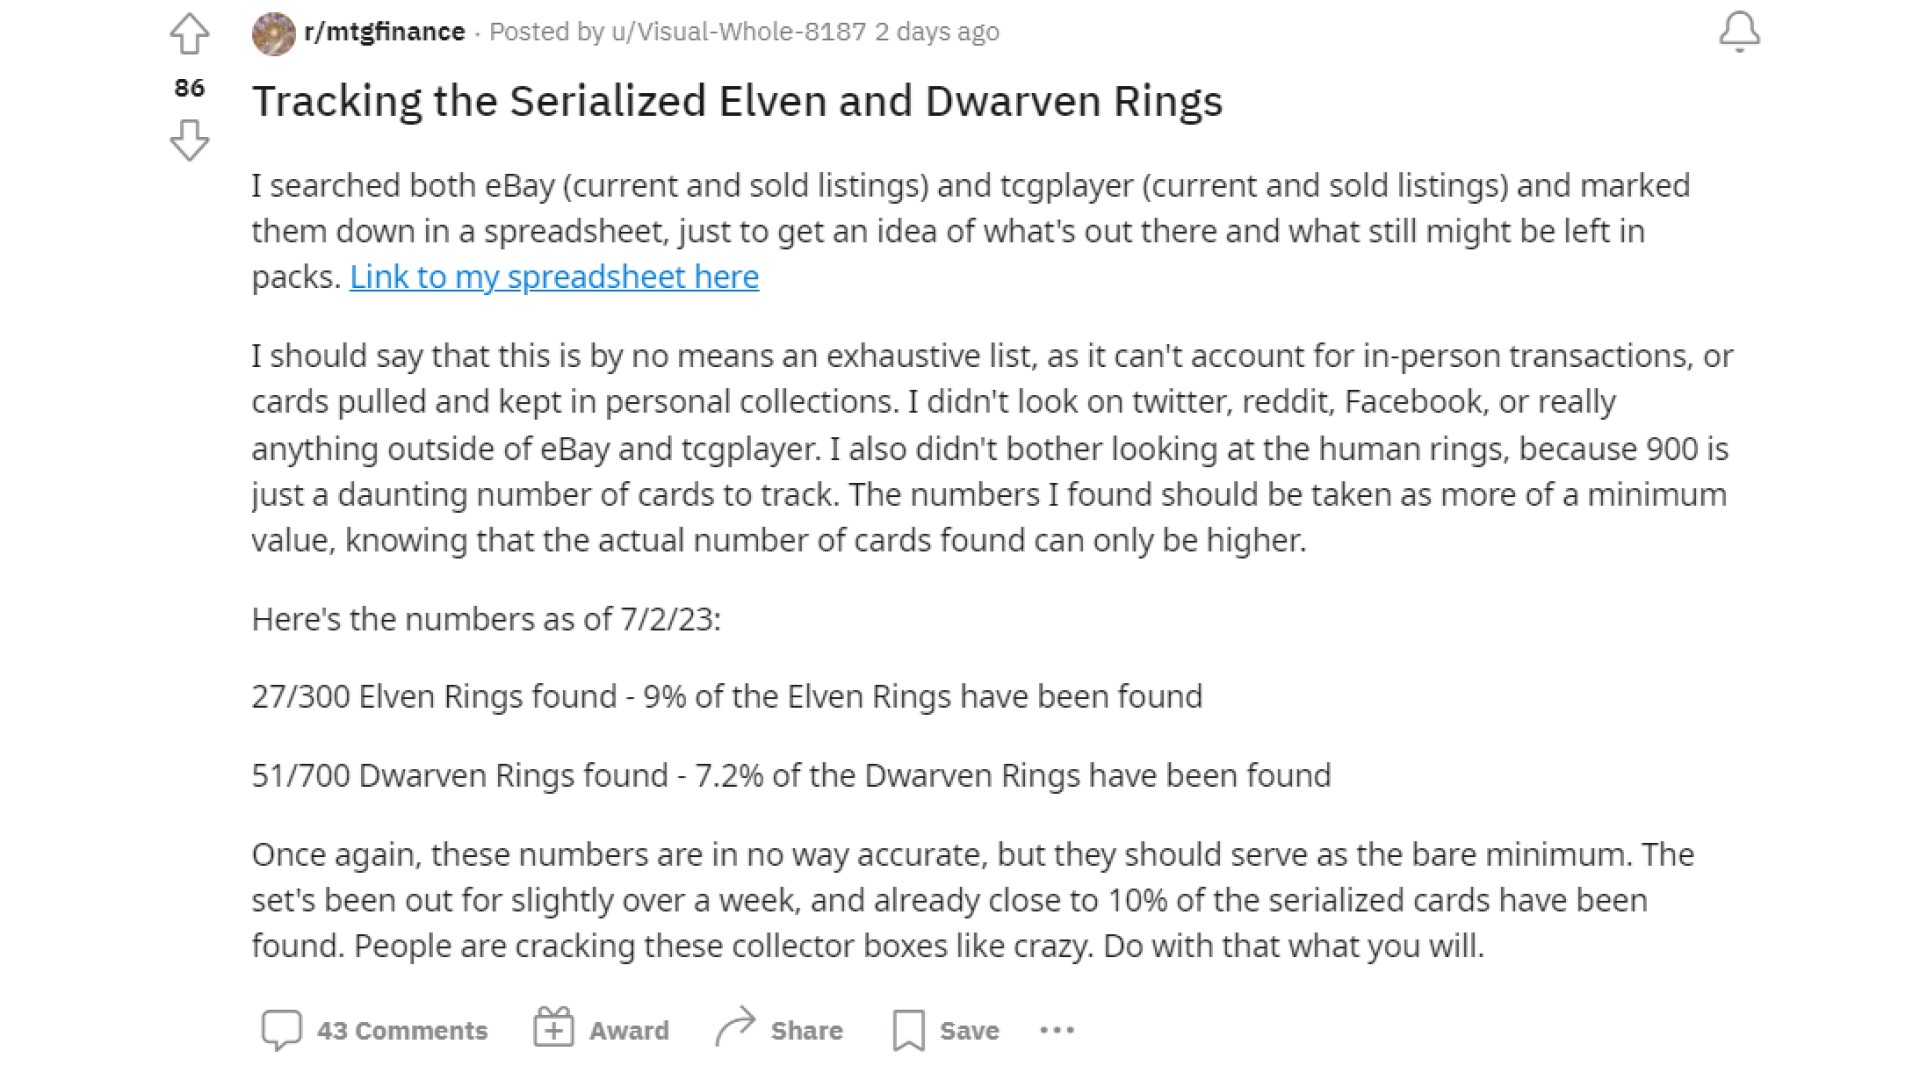 This MTG LotR fan is tracking the Rings of Power